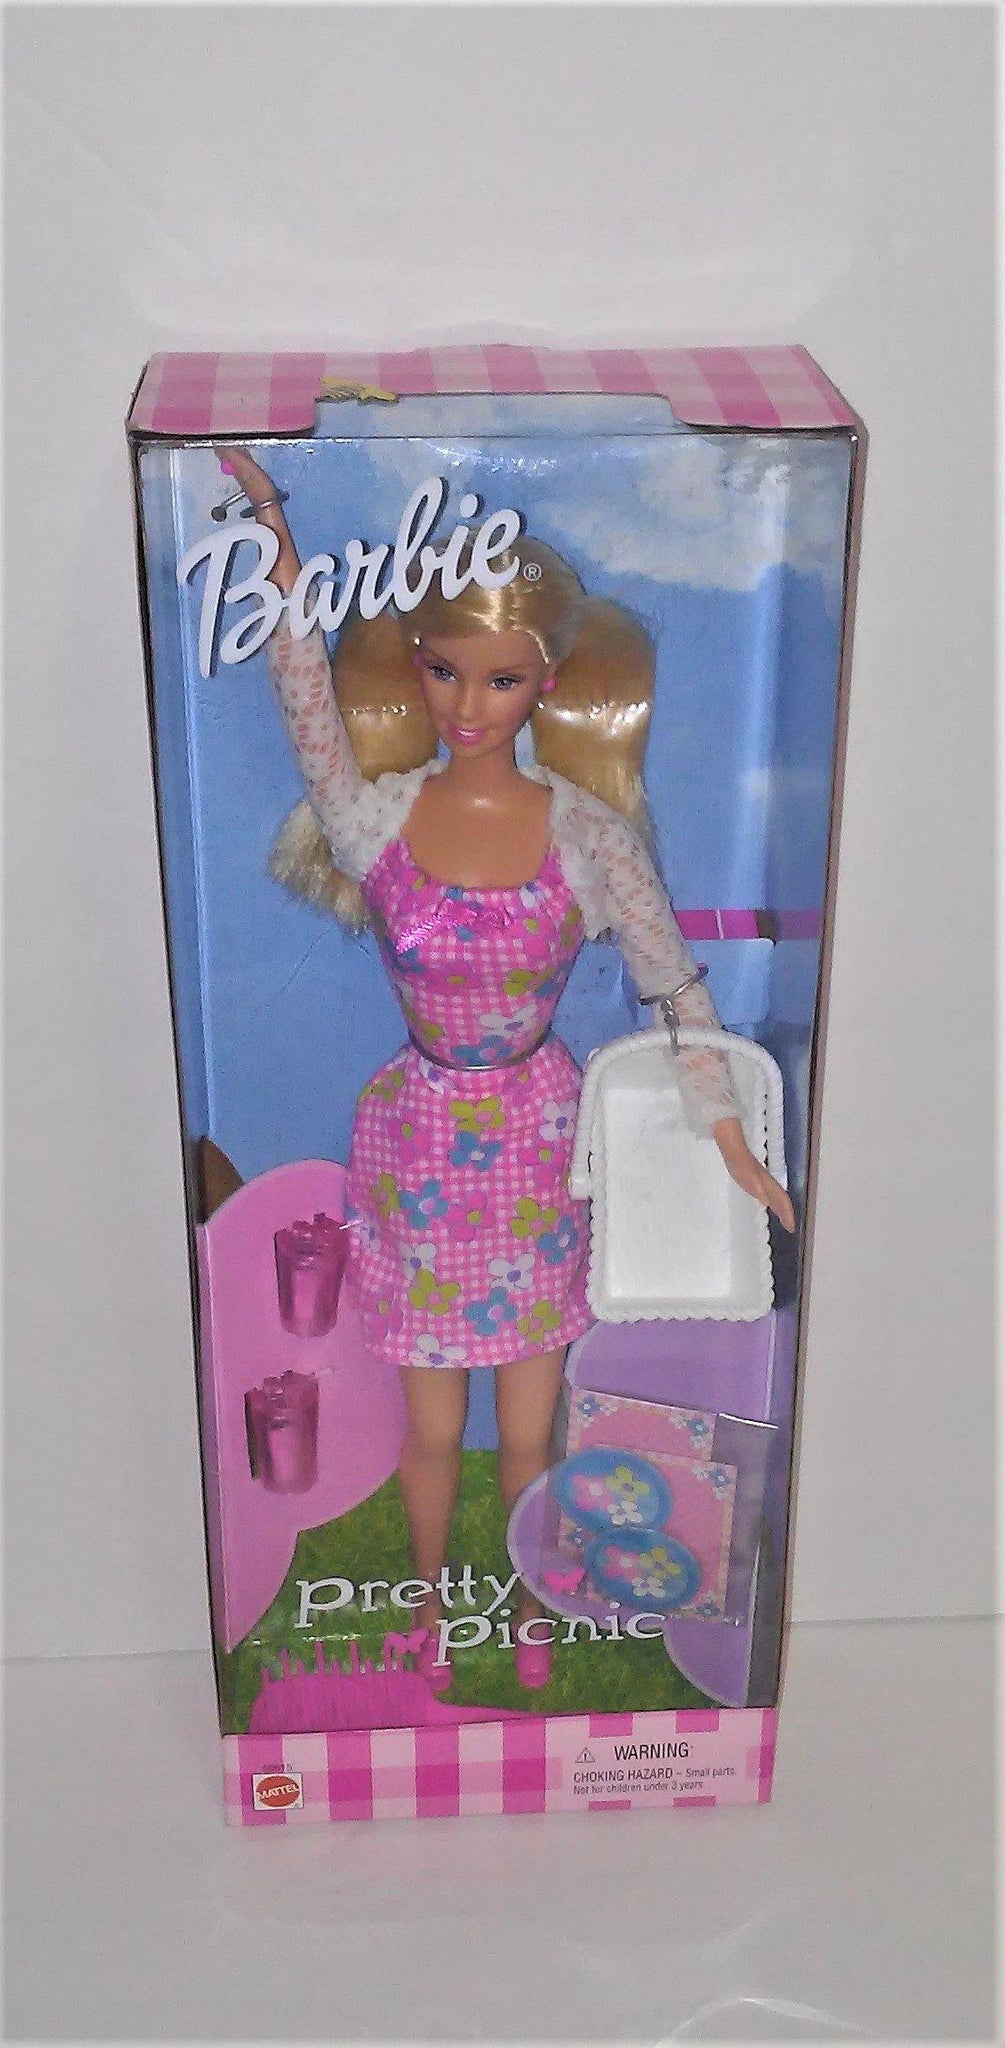 Barbie PRETTY PICNIC Doll Playset from 2000 – Sandee's Memories